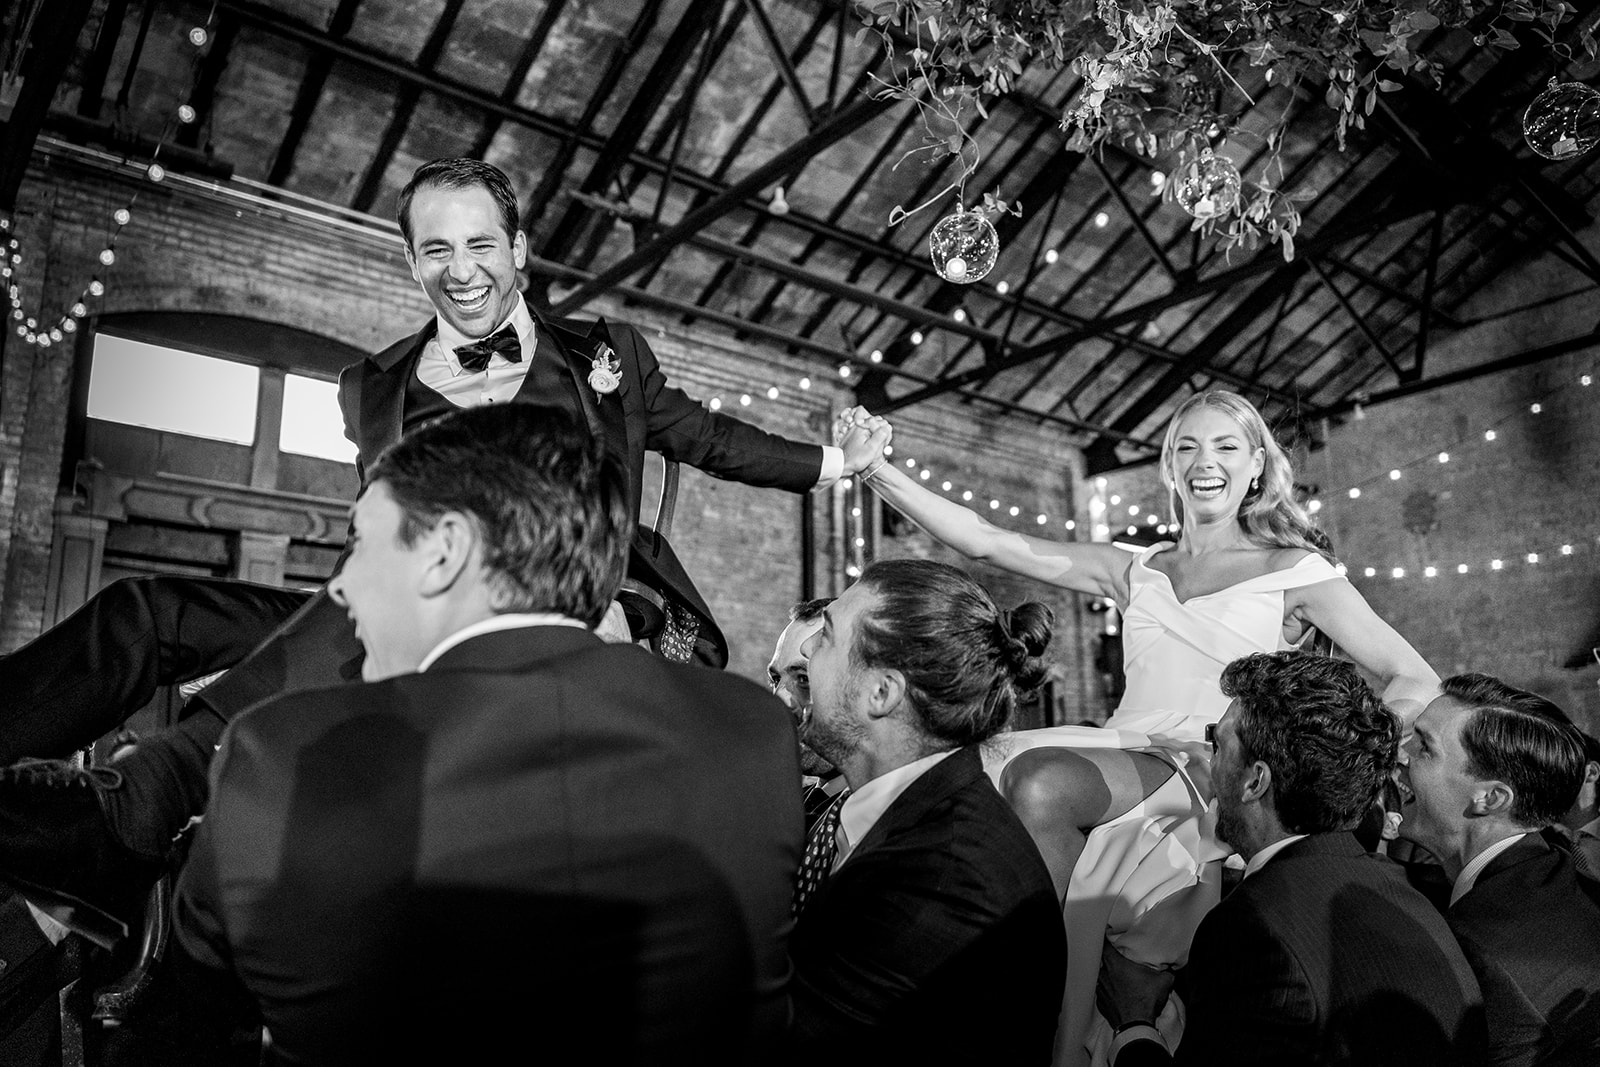 July and fireworks wedding at the Basilica in Hudson New York